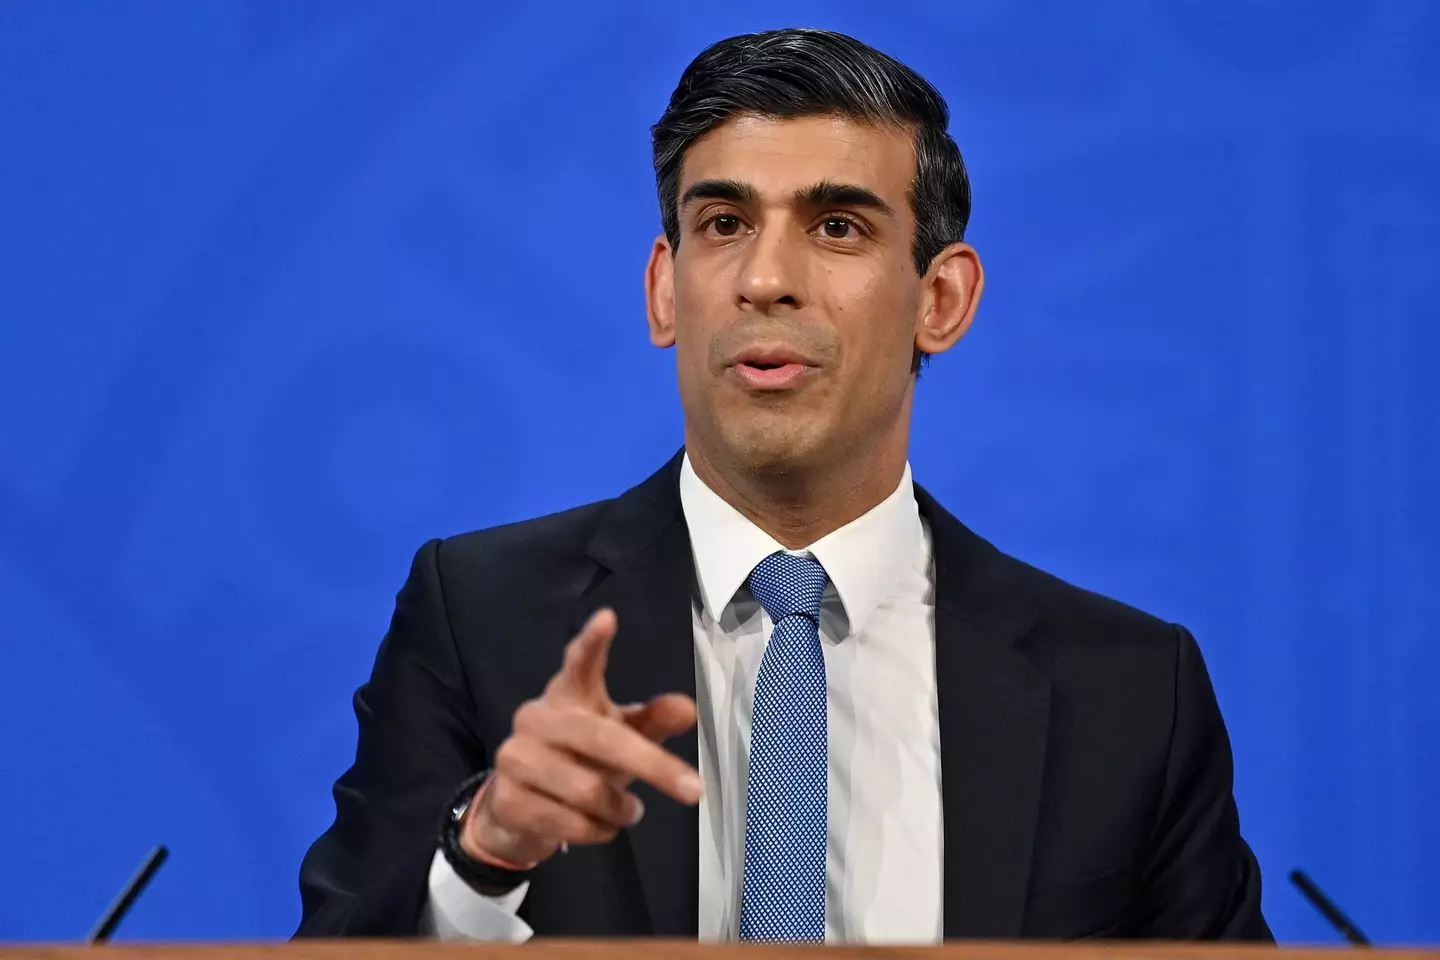 Chancellor Rishi Sunak announced £15 billion worth of aid in the Commons on Thursday.